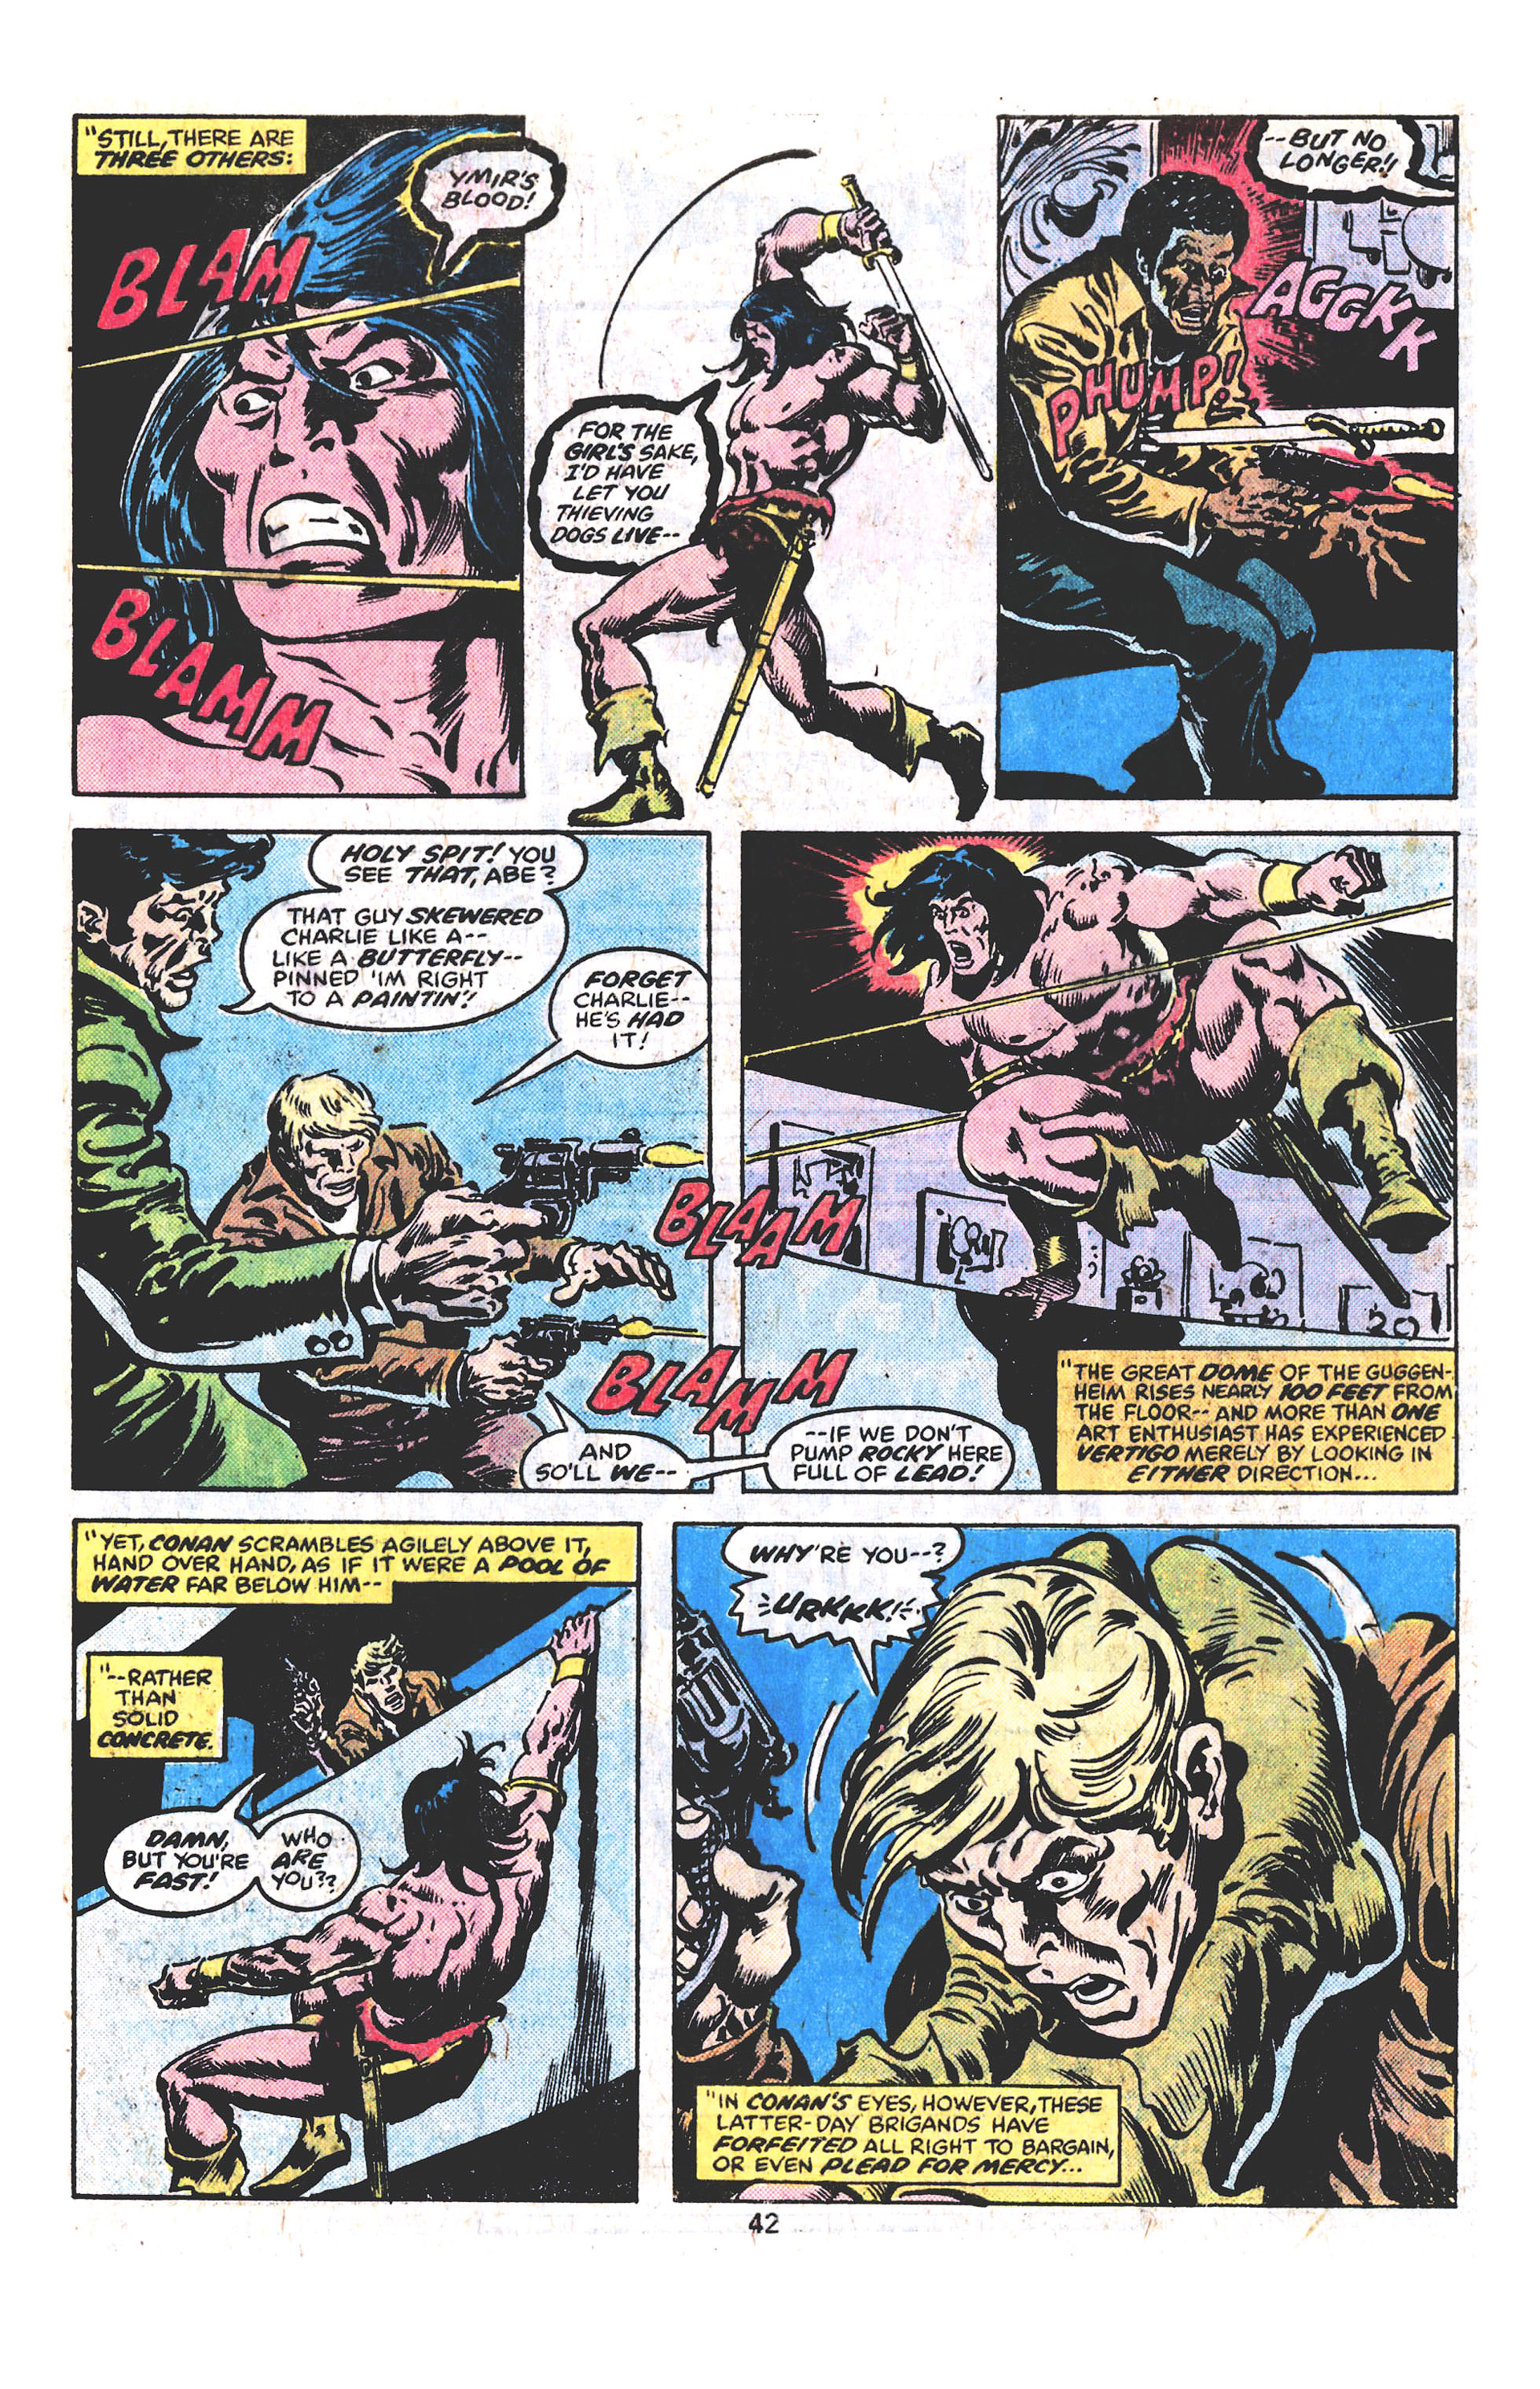 What If? (1977) Issue #13 - Conan The Barbarian walked the Earth Today #13 - English 31